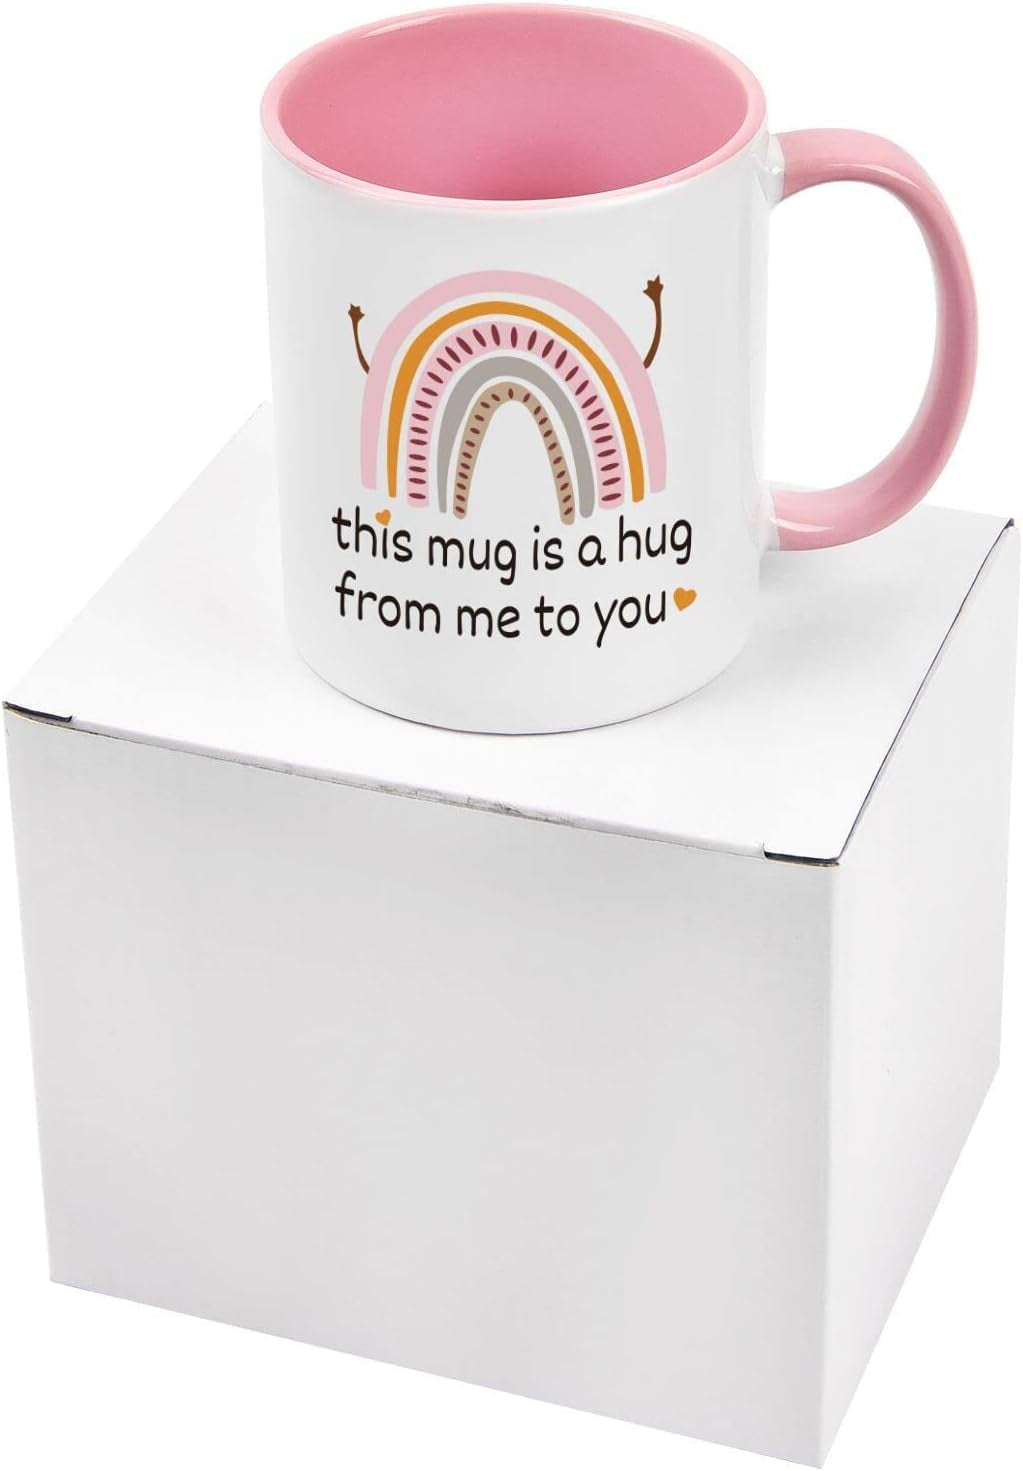 Valentine/Friendship Gifts, Gift for Best Friend, This Mug Is a Hug from Me to You, Encouragement Inspirational Gifts for Women, Birthday Mothers Day Christmas Gifts for Mom Coworker, Hug Mug, 11Oz